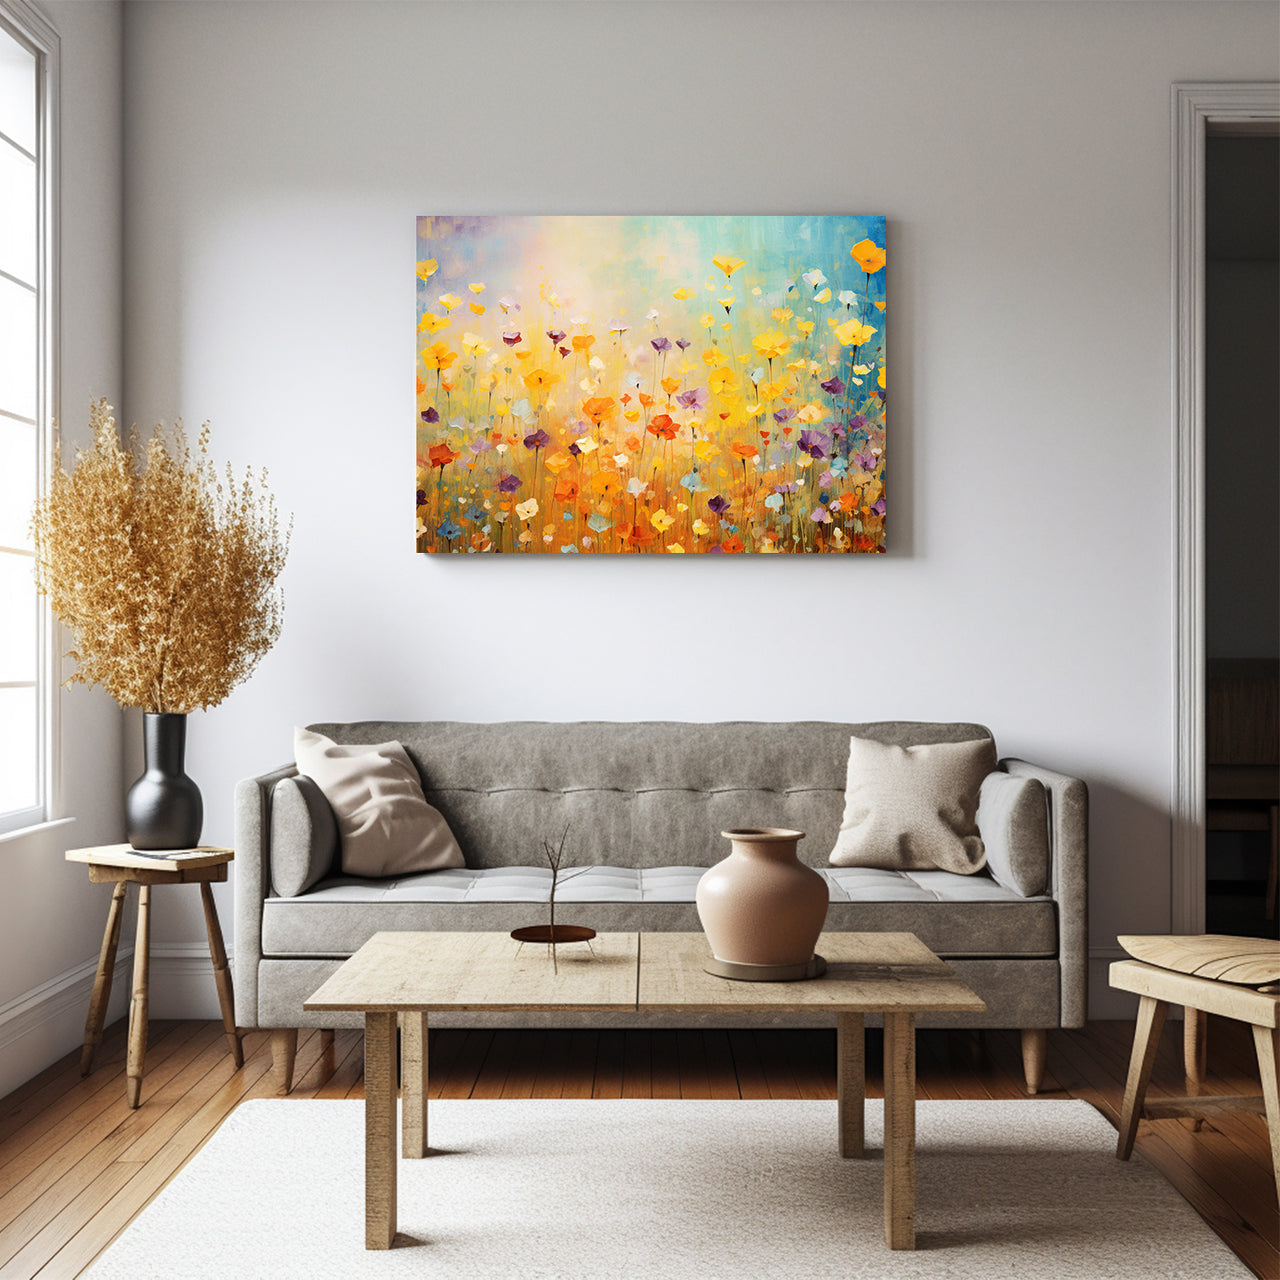 Wildflowers on Canvas, Colorful Wildflower Field Art Print 03, Minimalist Flower Wall Art, Abstract Wall Art, Watercolor flowers, Floral Print, Classic, Rustic Farmhouse, Wildflower Home Decor, Flower Painting Canvas, Floral Wall Art